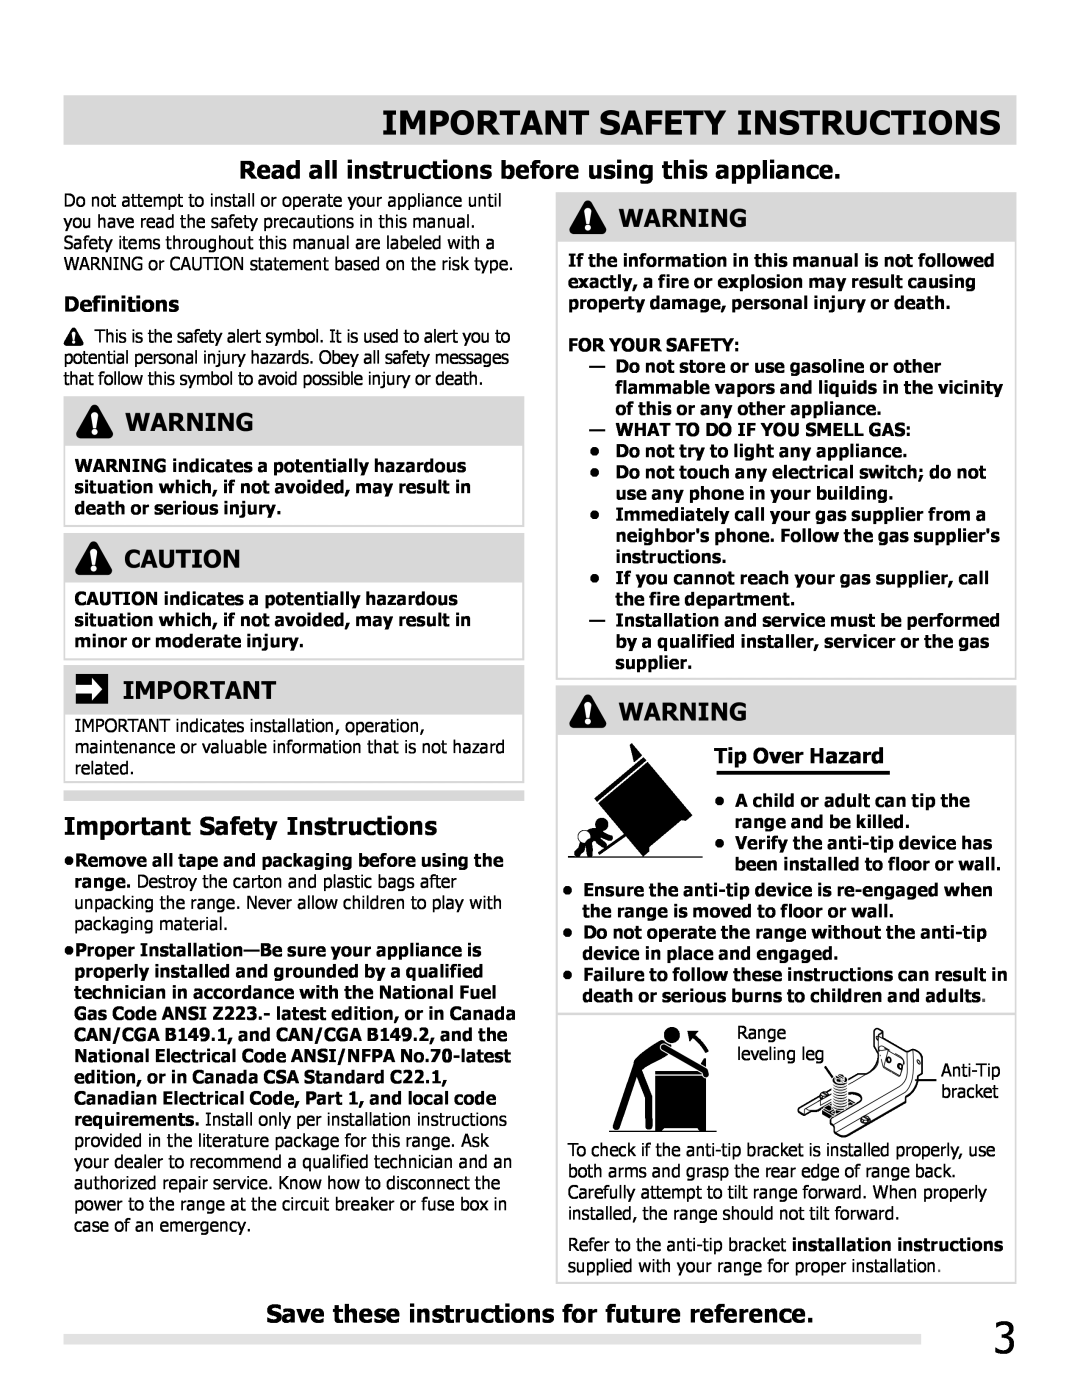 Frigidaire FGGF3032MB manual Important Safety Instructions, Read all instructions before using this appliance, Definitions 